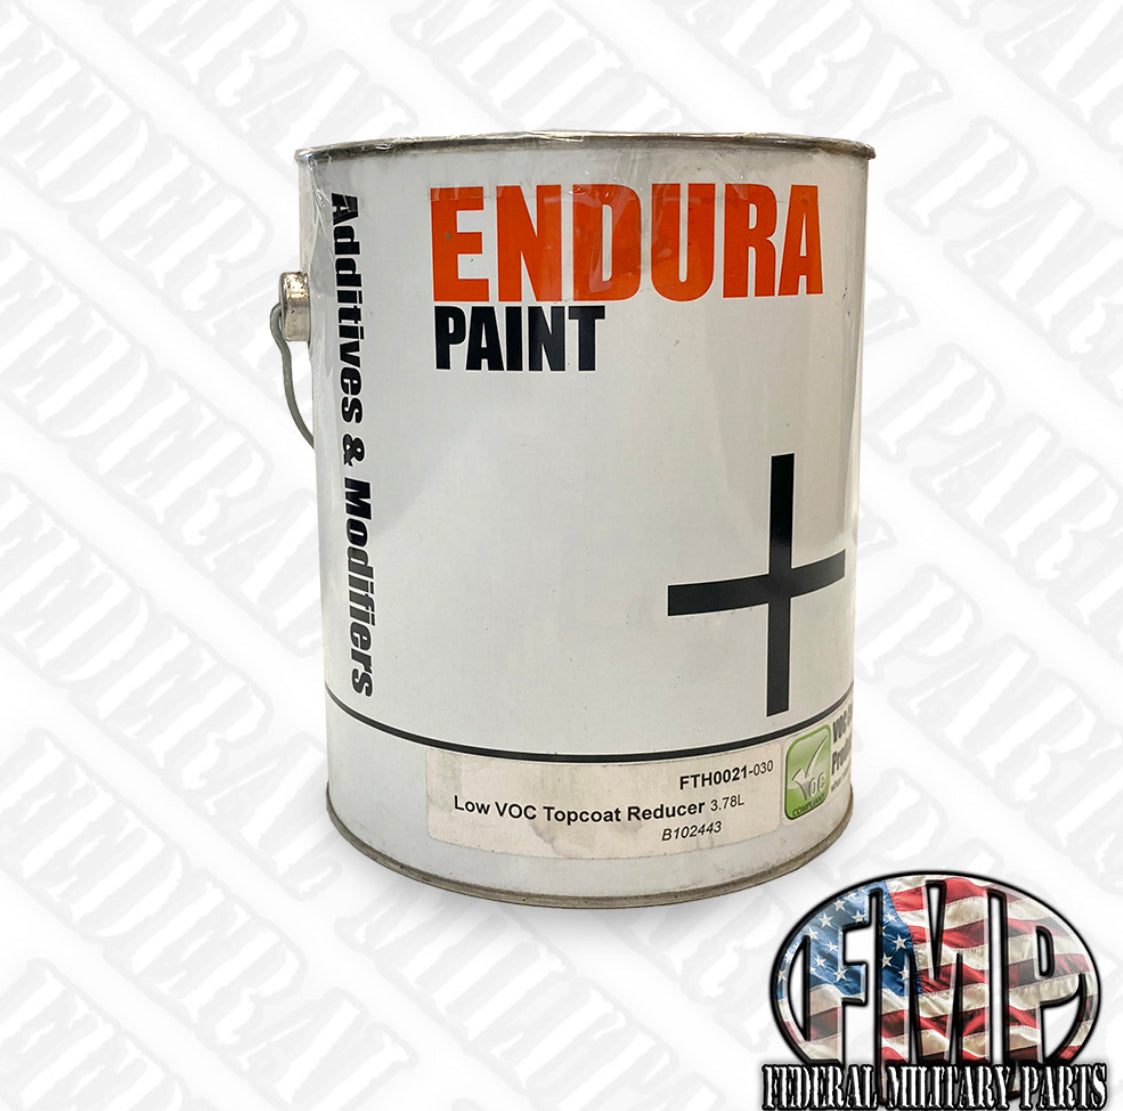 Military Paint Gallon - Black, Woodland Camo Brown, Tan, Or Nc/383 Green - 1 GAL - Paint Only - No Primer Needed